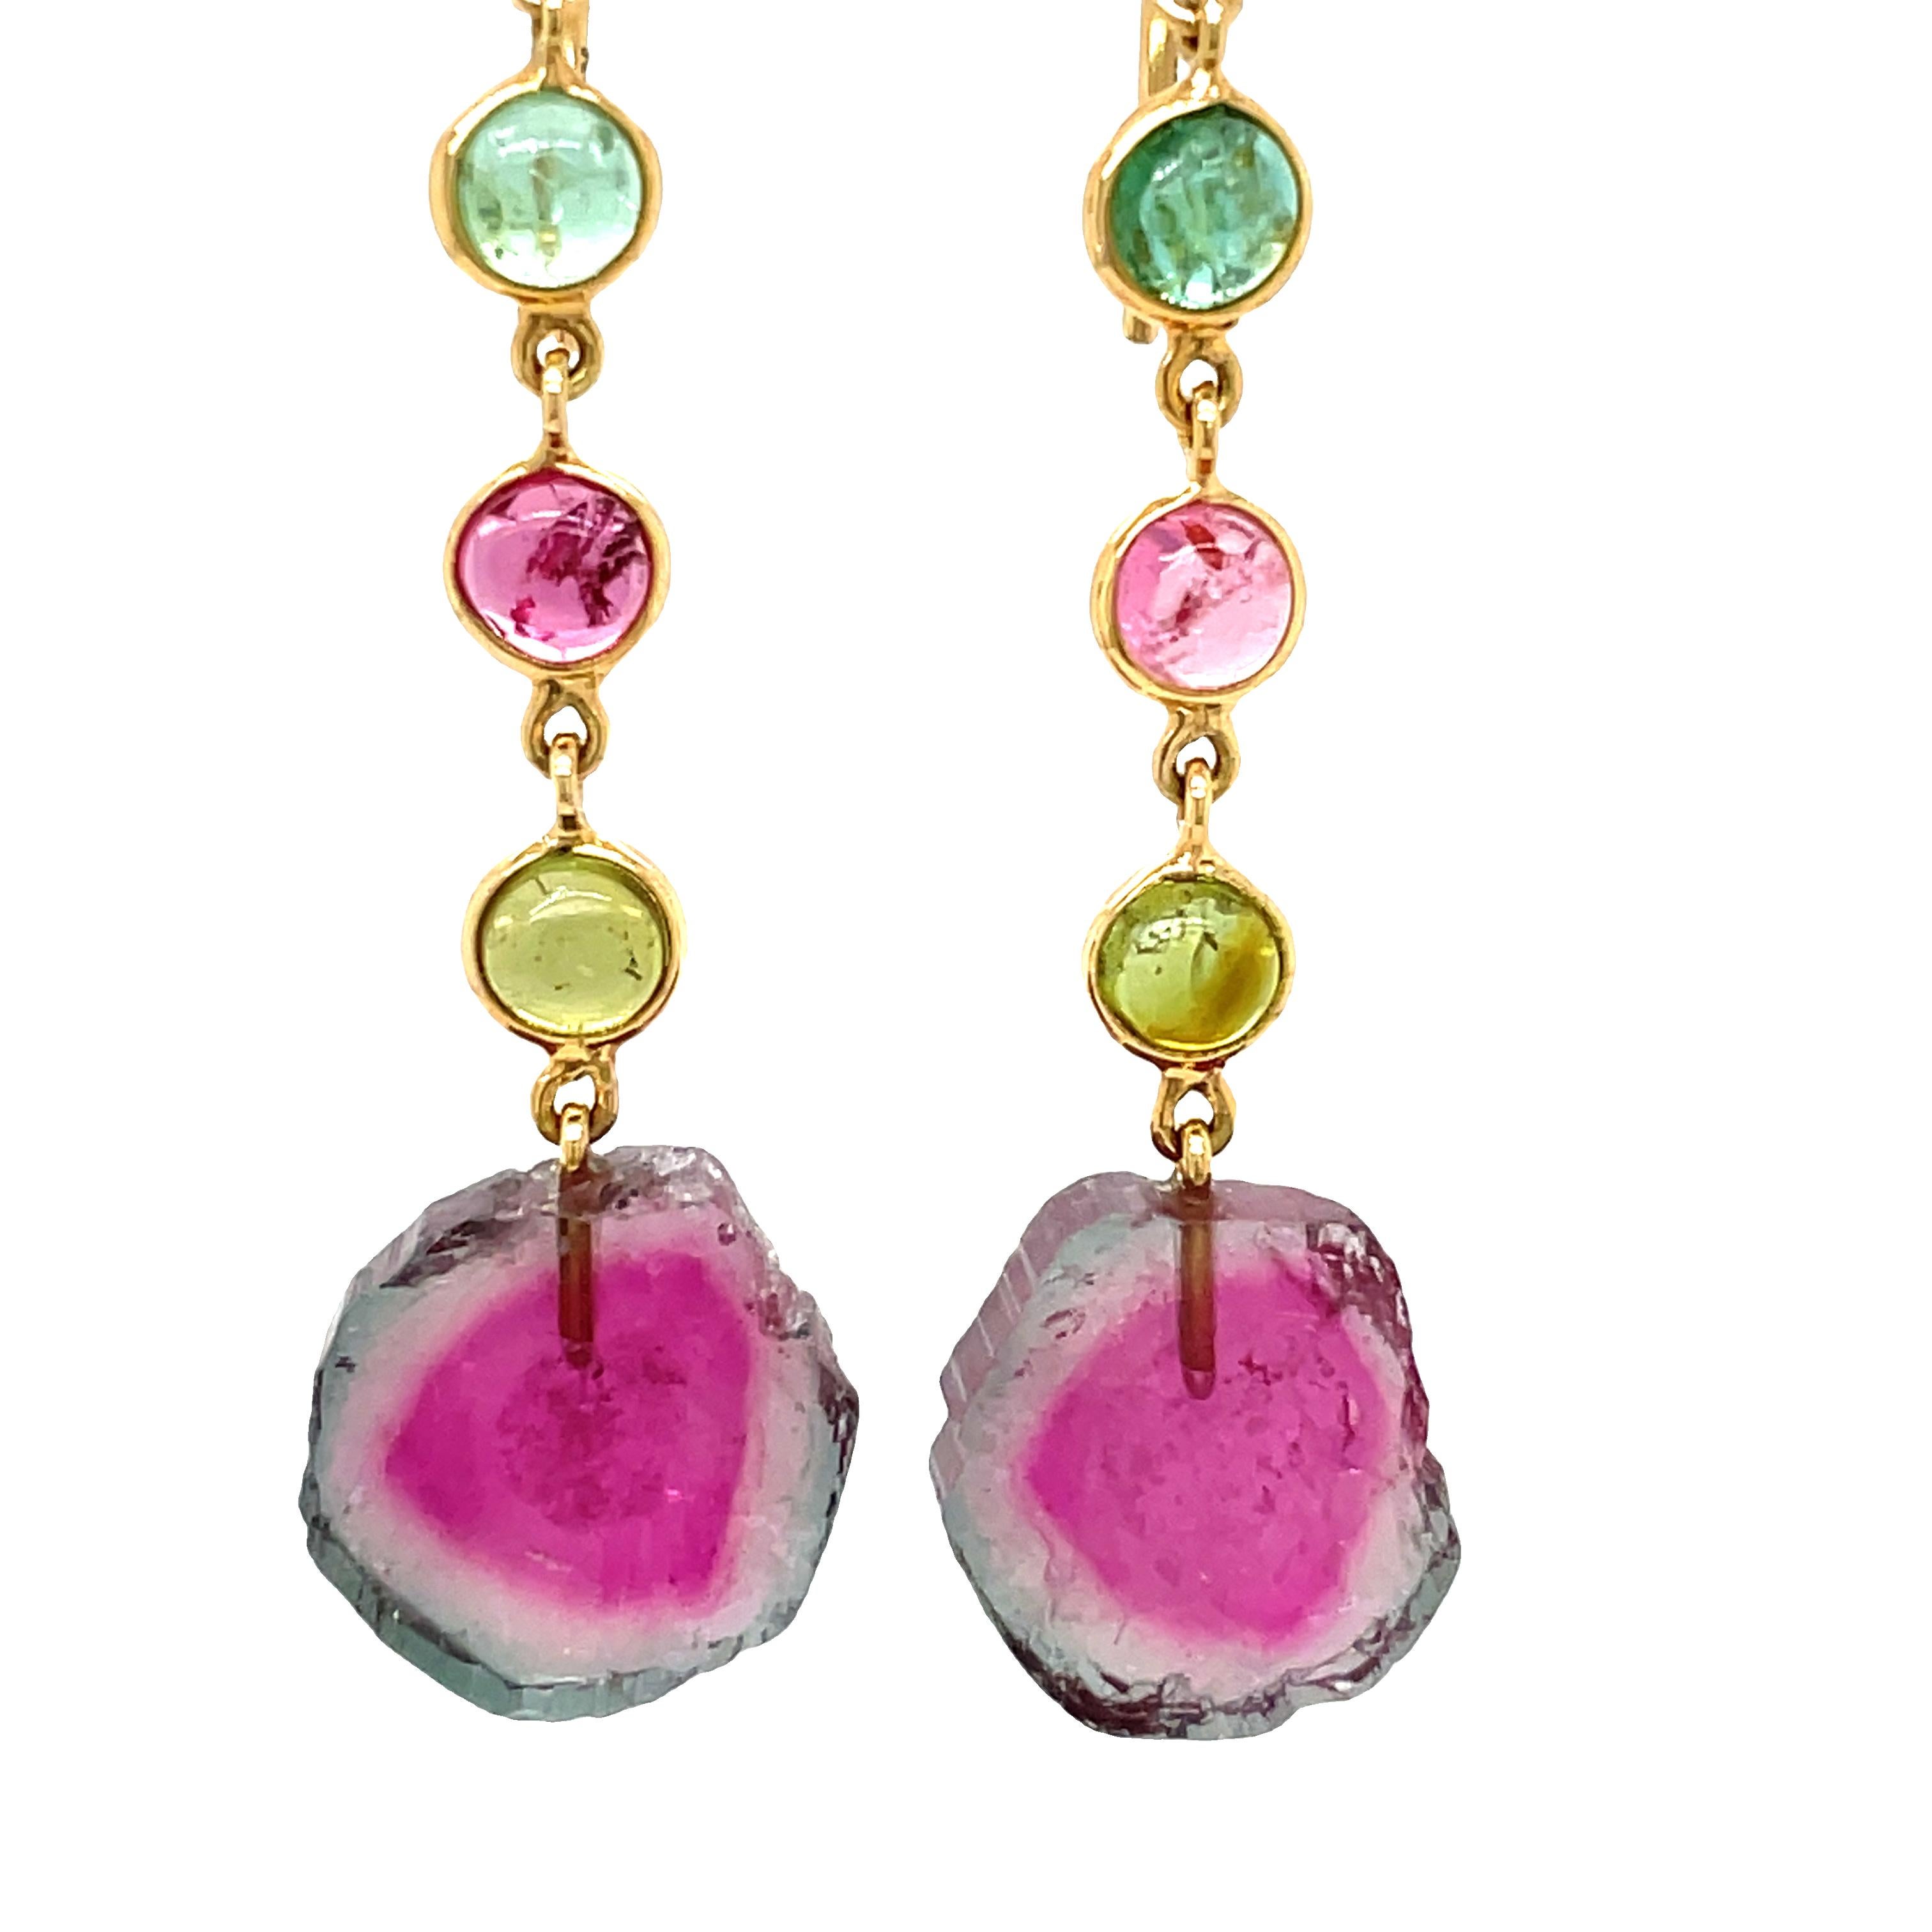 The rich and vibrant colors of the multi-color and Watermelon Tourmaline make for a truly mesmerizing piece of jewelry. Weighing in at a combined total weight of 2.19 carats. At the top of the earring, you'll find a trio of bezel-set multi-color